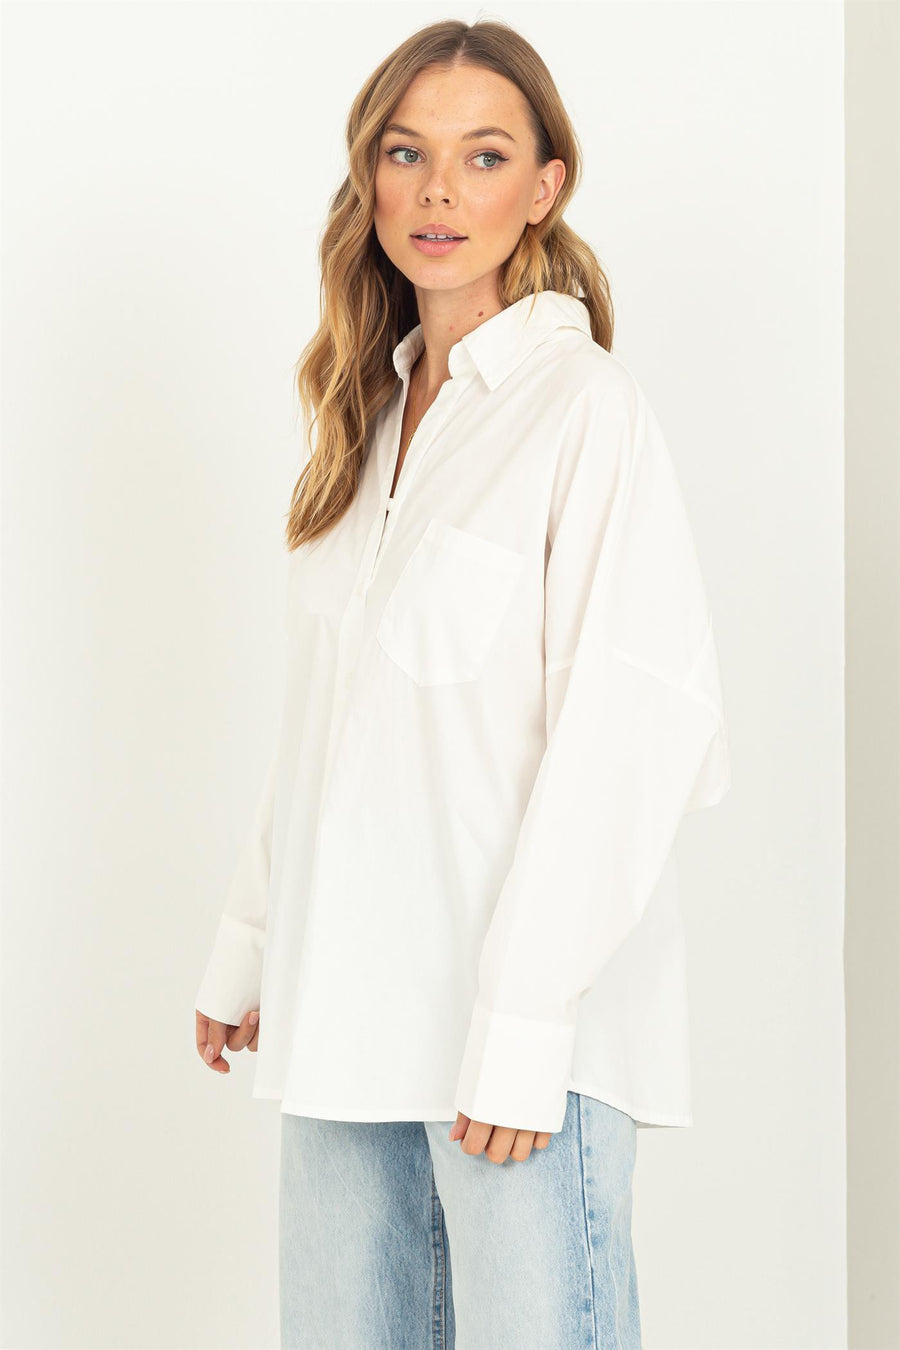 White oversized button up shirt.